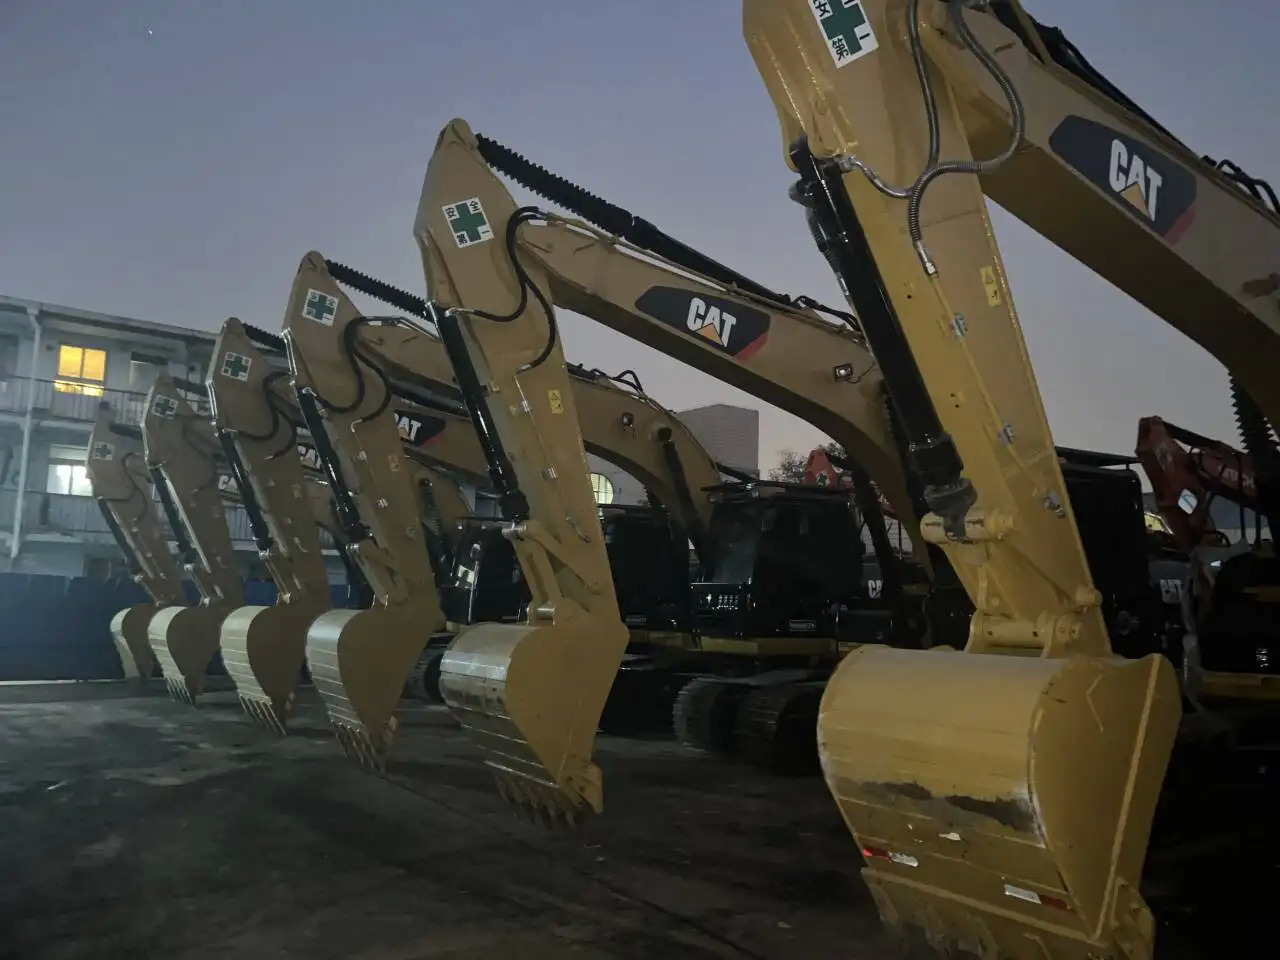 Pelle sur chenille High Quality Second Hand Digger Caterpillar Used Excavators Cat 320d2,320d,320dl For Sale In Shanghai: photos 2